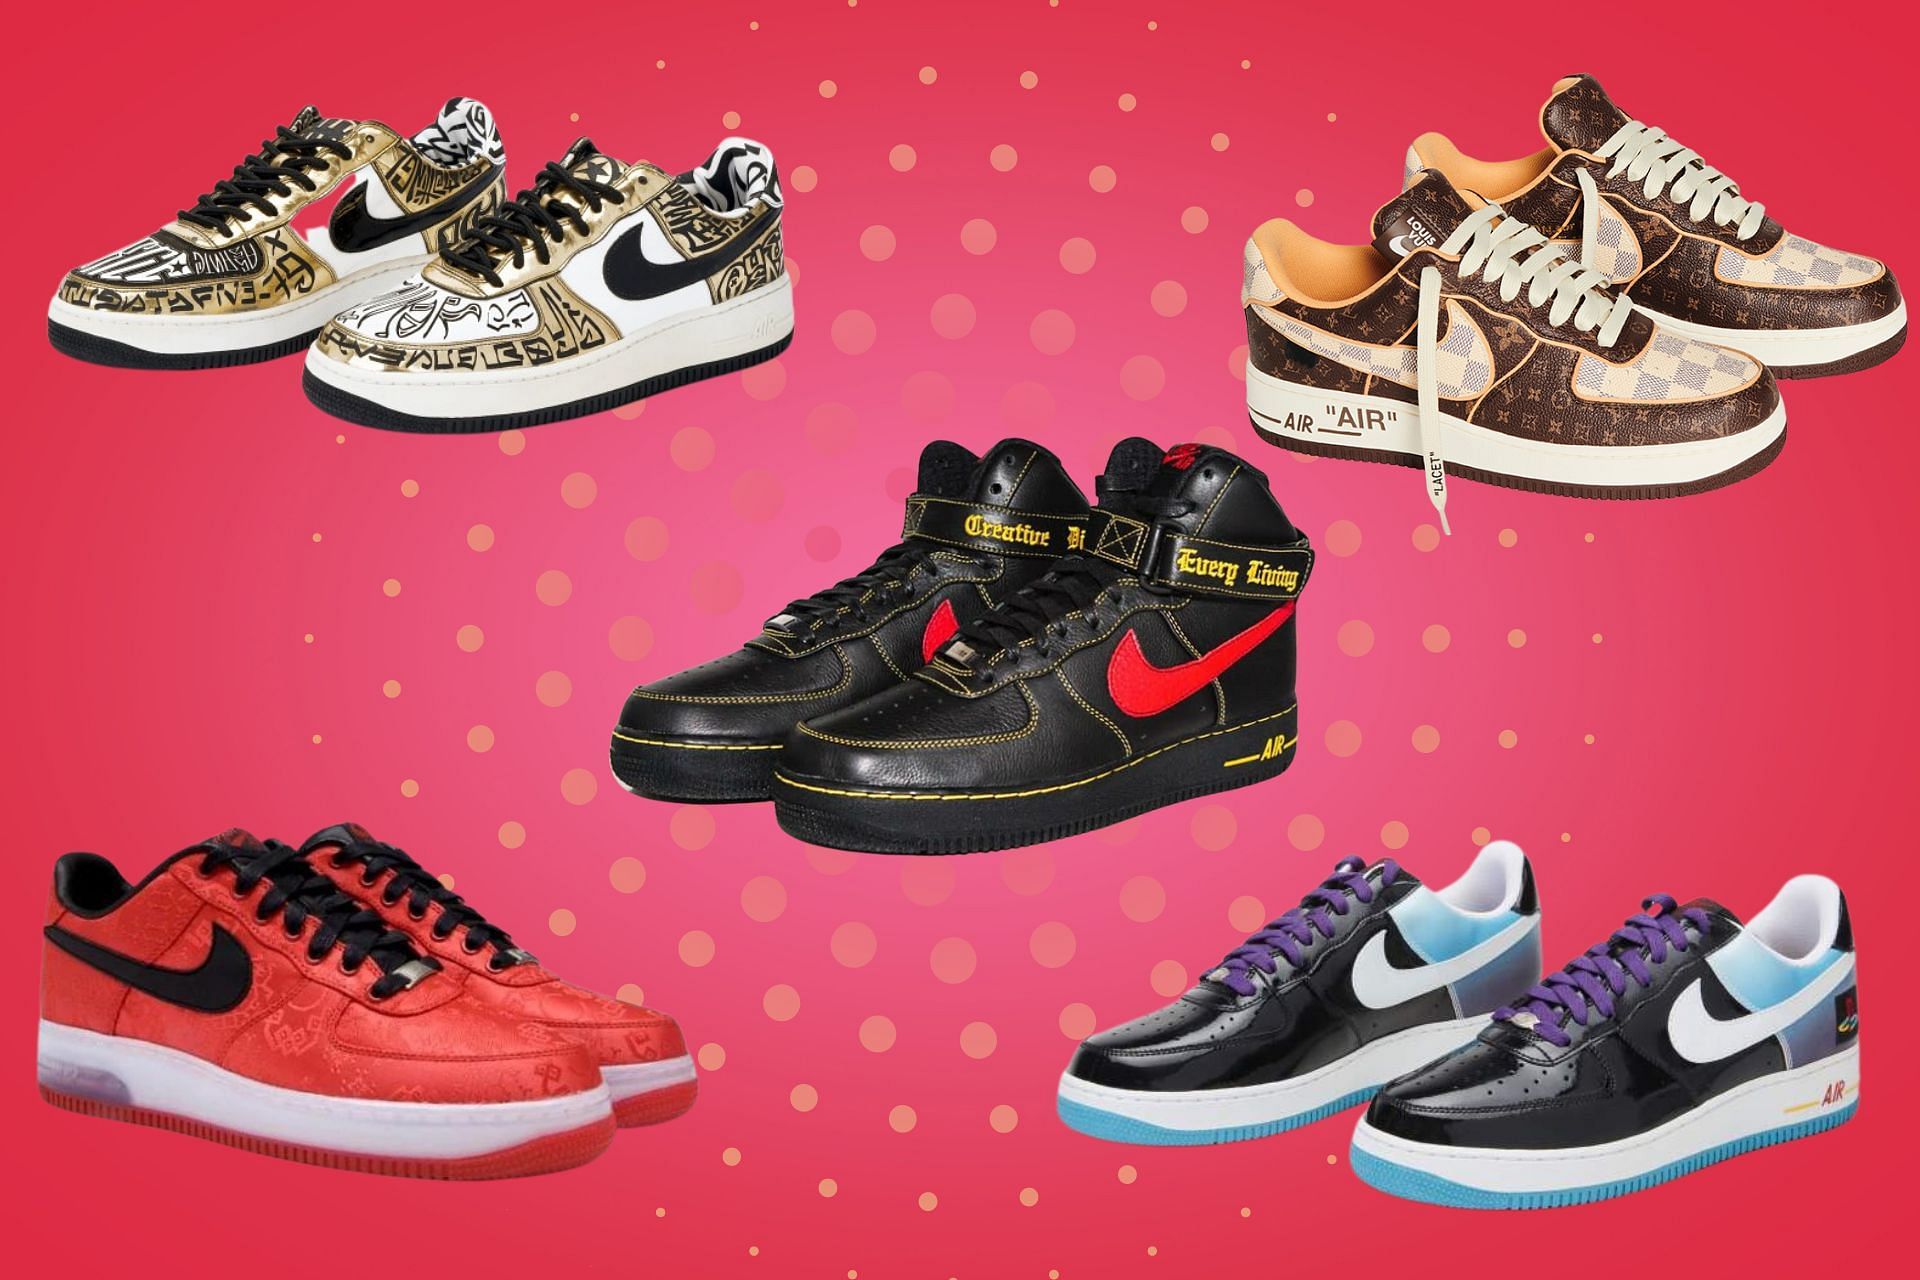 Shop Shoes Above 1 Lakh | UP TO 51% OFF